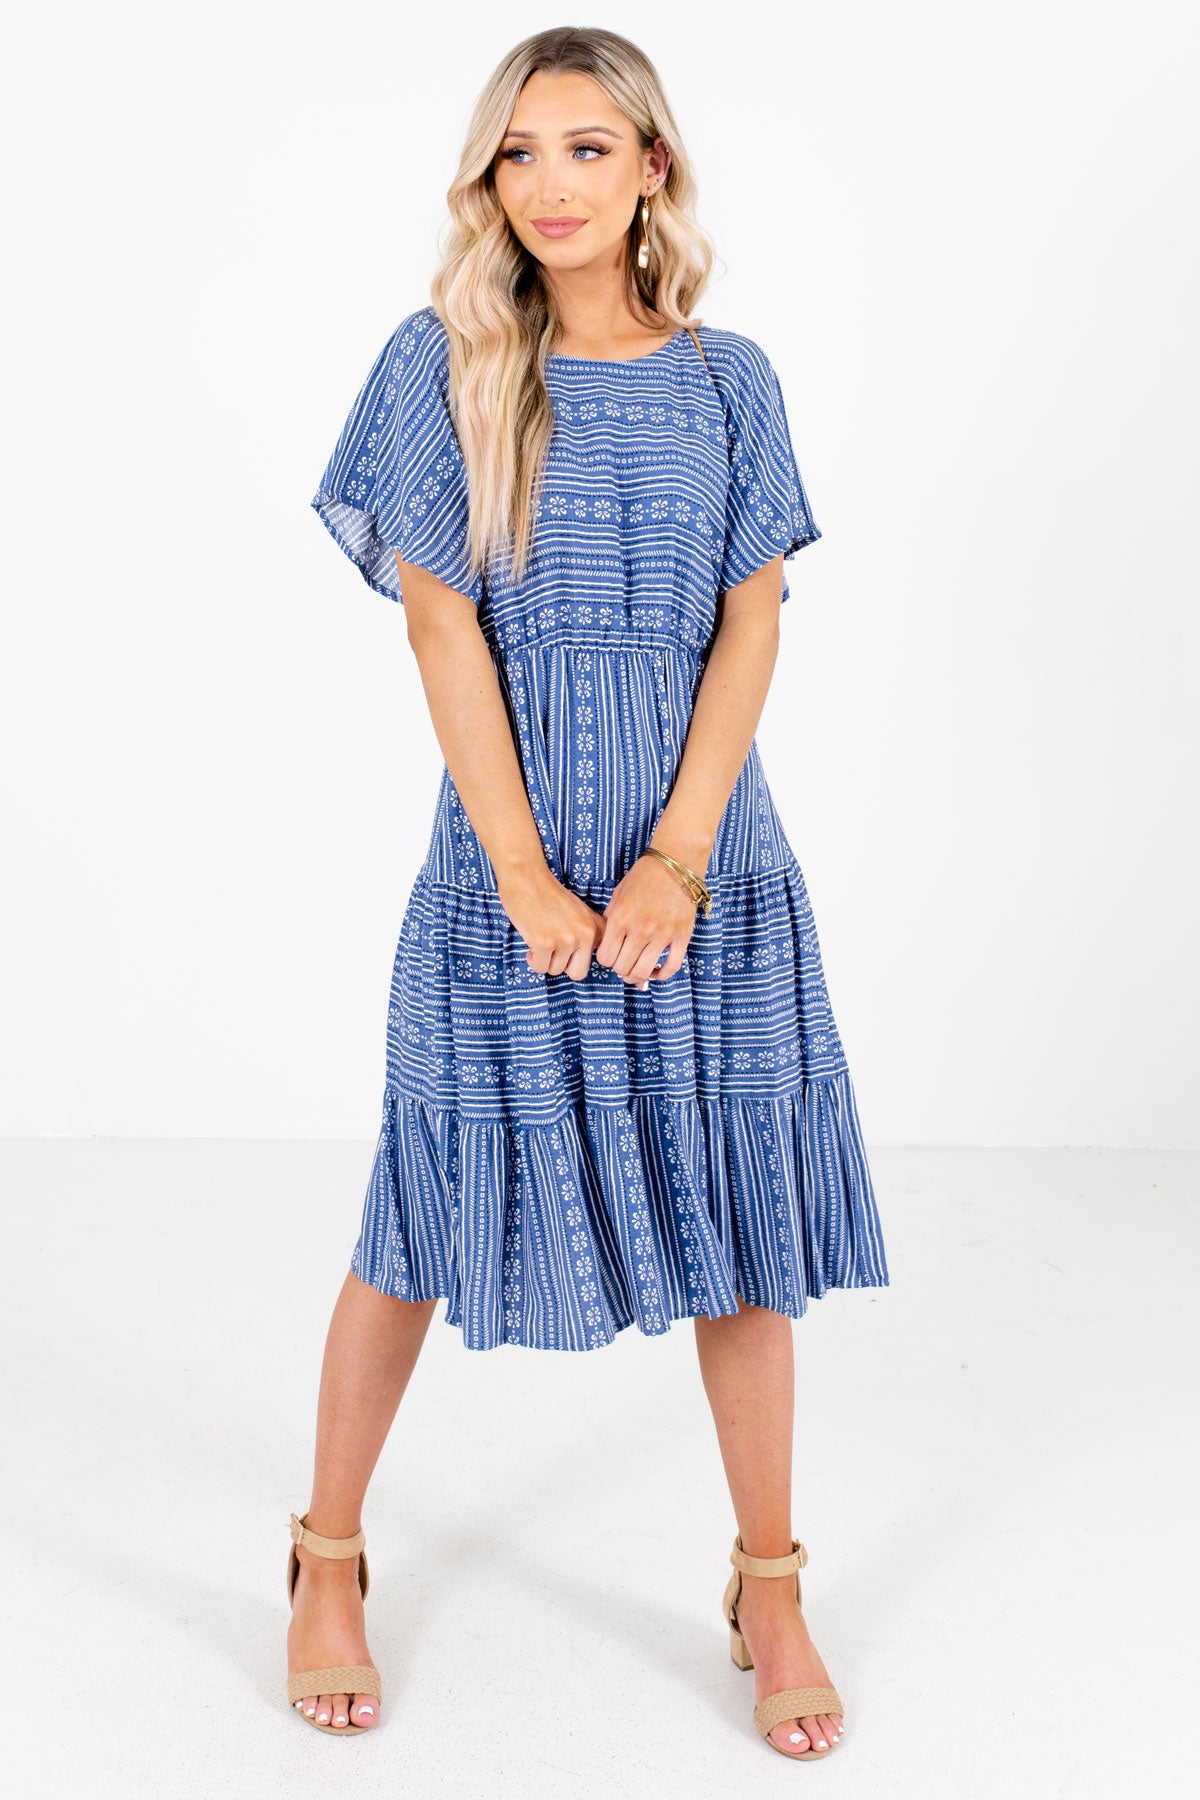 Blue Cute and Comfortable Boutique Knee-Length Dresses for Women